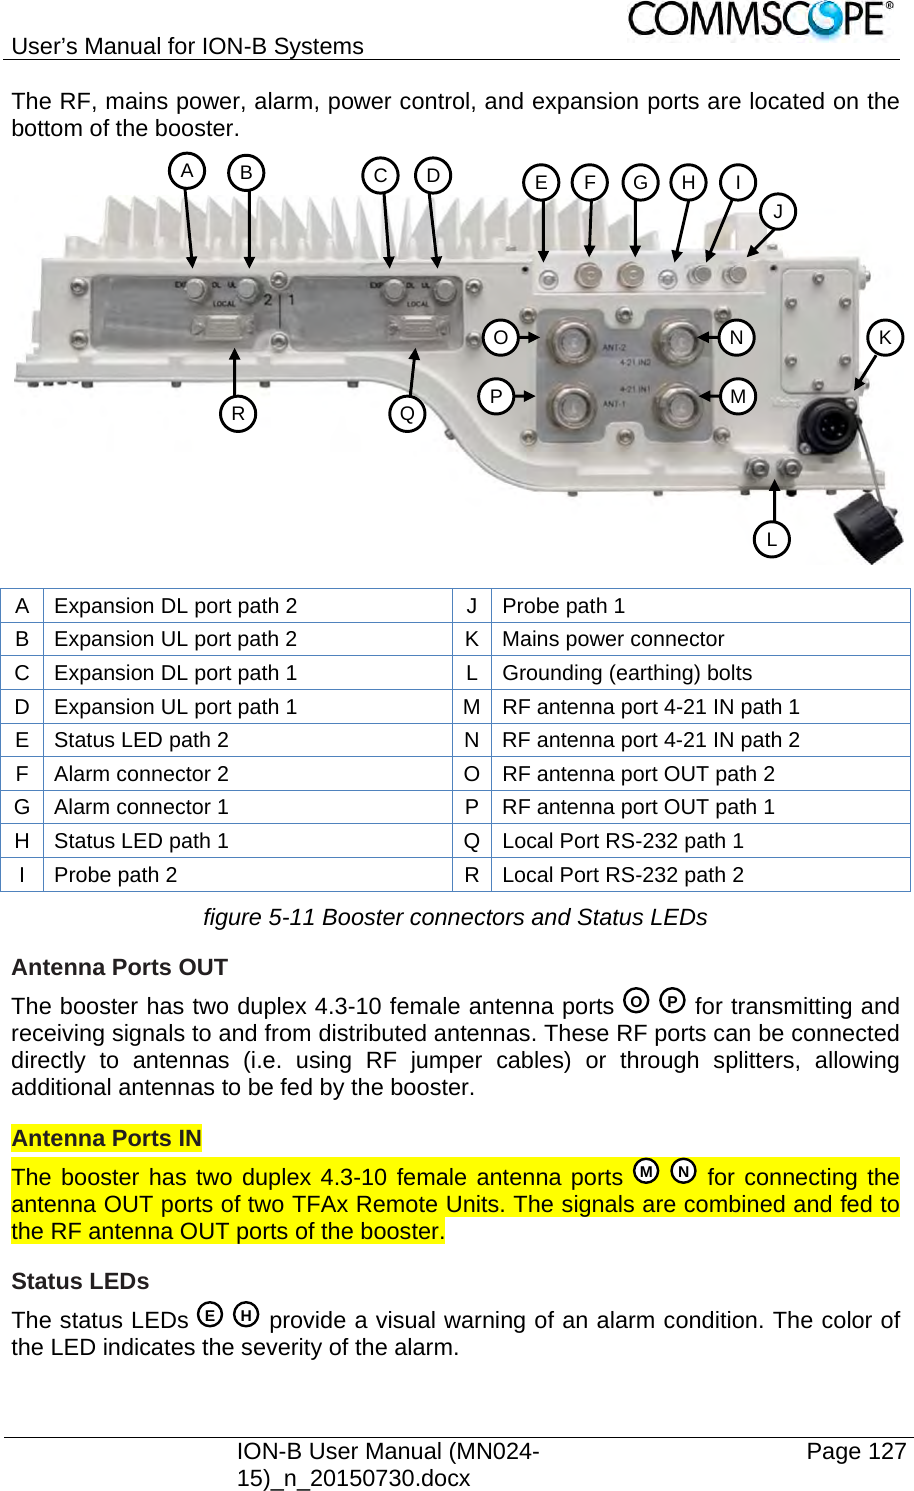 User’s Manual for ION-B Systems    ION-B User Manual (MN024-15)_n_20150730.docx  Page 127 The RF, mains power, alarm, power control, and expansion ports are located on the bottom of the booster.    A  Expansion DL port path 2  J  Probe path 1 B  Expansion UL port path 2  K  Mains power connector C  Expansion DL port path 1  L  Grounding (earthing) bolts D  Expansion UL port path 1  M RF antenna port 4-21 IN path 1 E  Status LED path 2  N RF antenna port 4-21 IN path 2 F  Alarm connector 2  O RF antenna port OUT path 2 G  Alarm connector 1  P  RF antenna port OUT path 1 H  Status LED path 1  Q Local Port RS-232 path 1 I  Probe path 2  R Local Port RS-232 path 2 figure 5-11 Booster connectors and Status LEDs Antenna Ports OUT The booster has two duplex 4.3-10 female antenna ports     for transmitting and receiving signals to and from distributed antennas. These RF ports can be connected directly to antennas (i.e. using RF jumper cables) or through splitters, allowing additional antennas to be fed by the booster. Antenna Ports IN The booster has two duplex 4.3-10 female antenna ports    for connecting the antenna OUT ports of two TFAx Remote Units. The signals are combined and fed to the RF antenna OUT ports of the booster. Status LEDs The status LEDs     provide a visual warning of an alarm condition. The color of the LED indicates the severity of the alarm.   H E NMPOA  B  C D E F G H I J N M POQKR L 